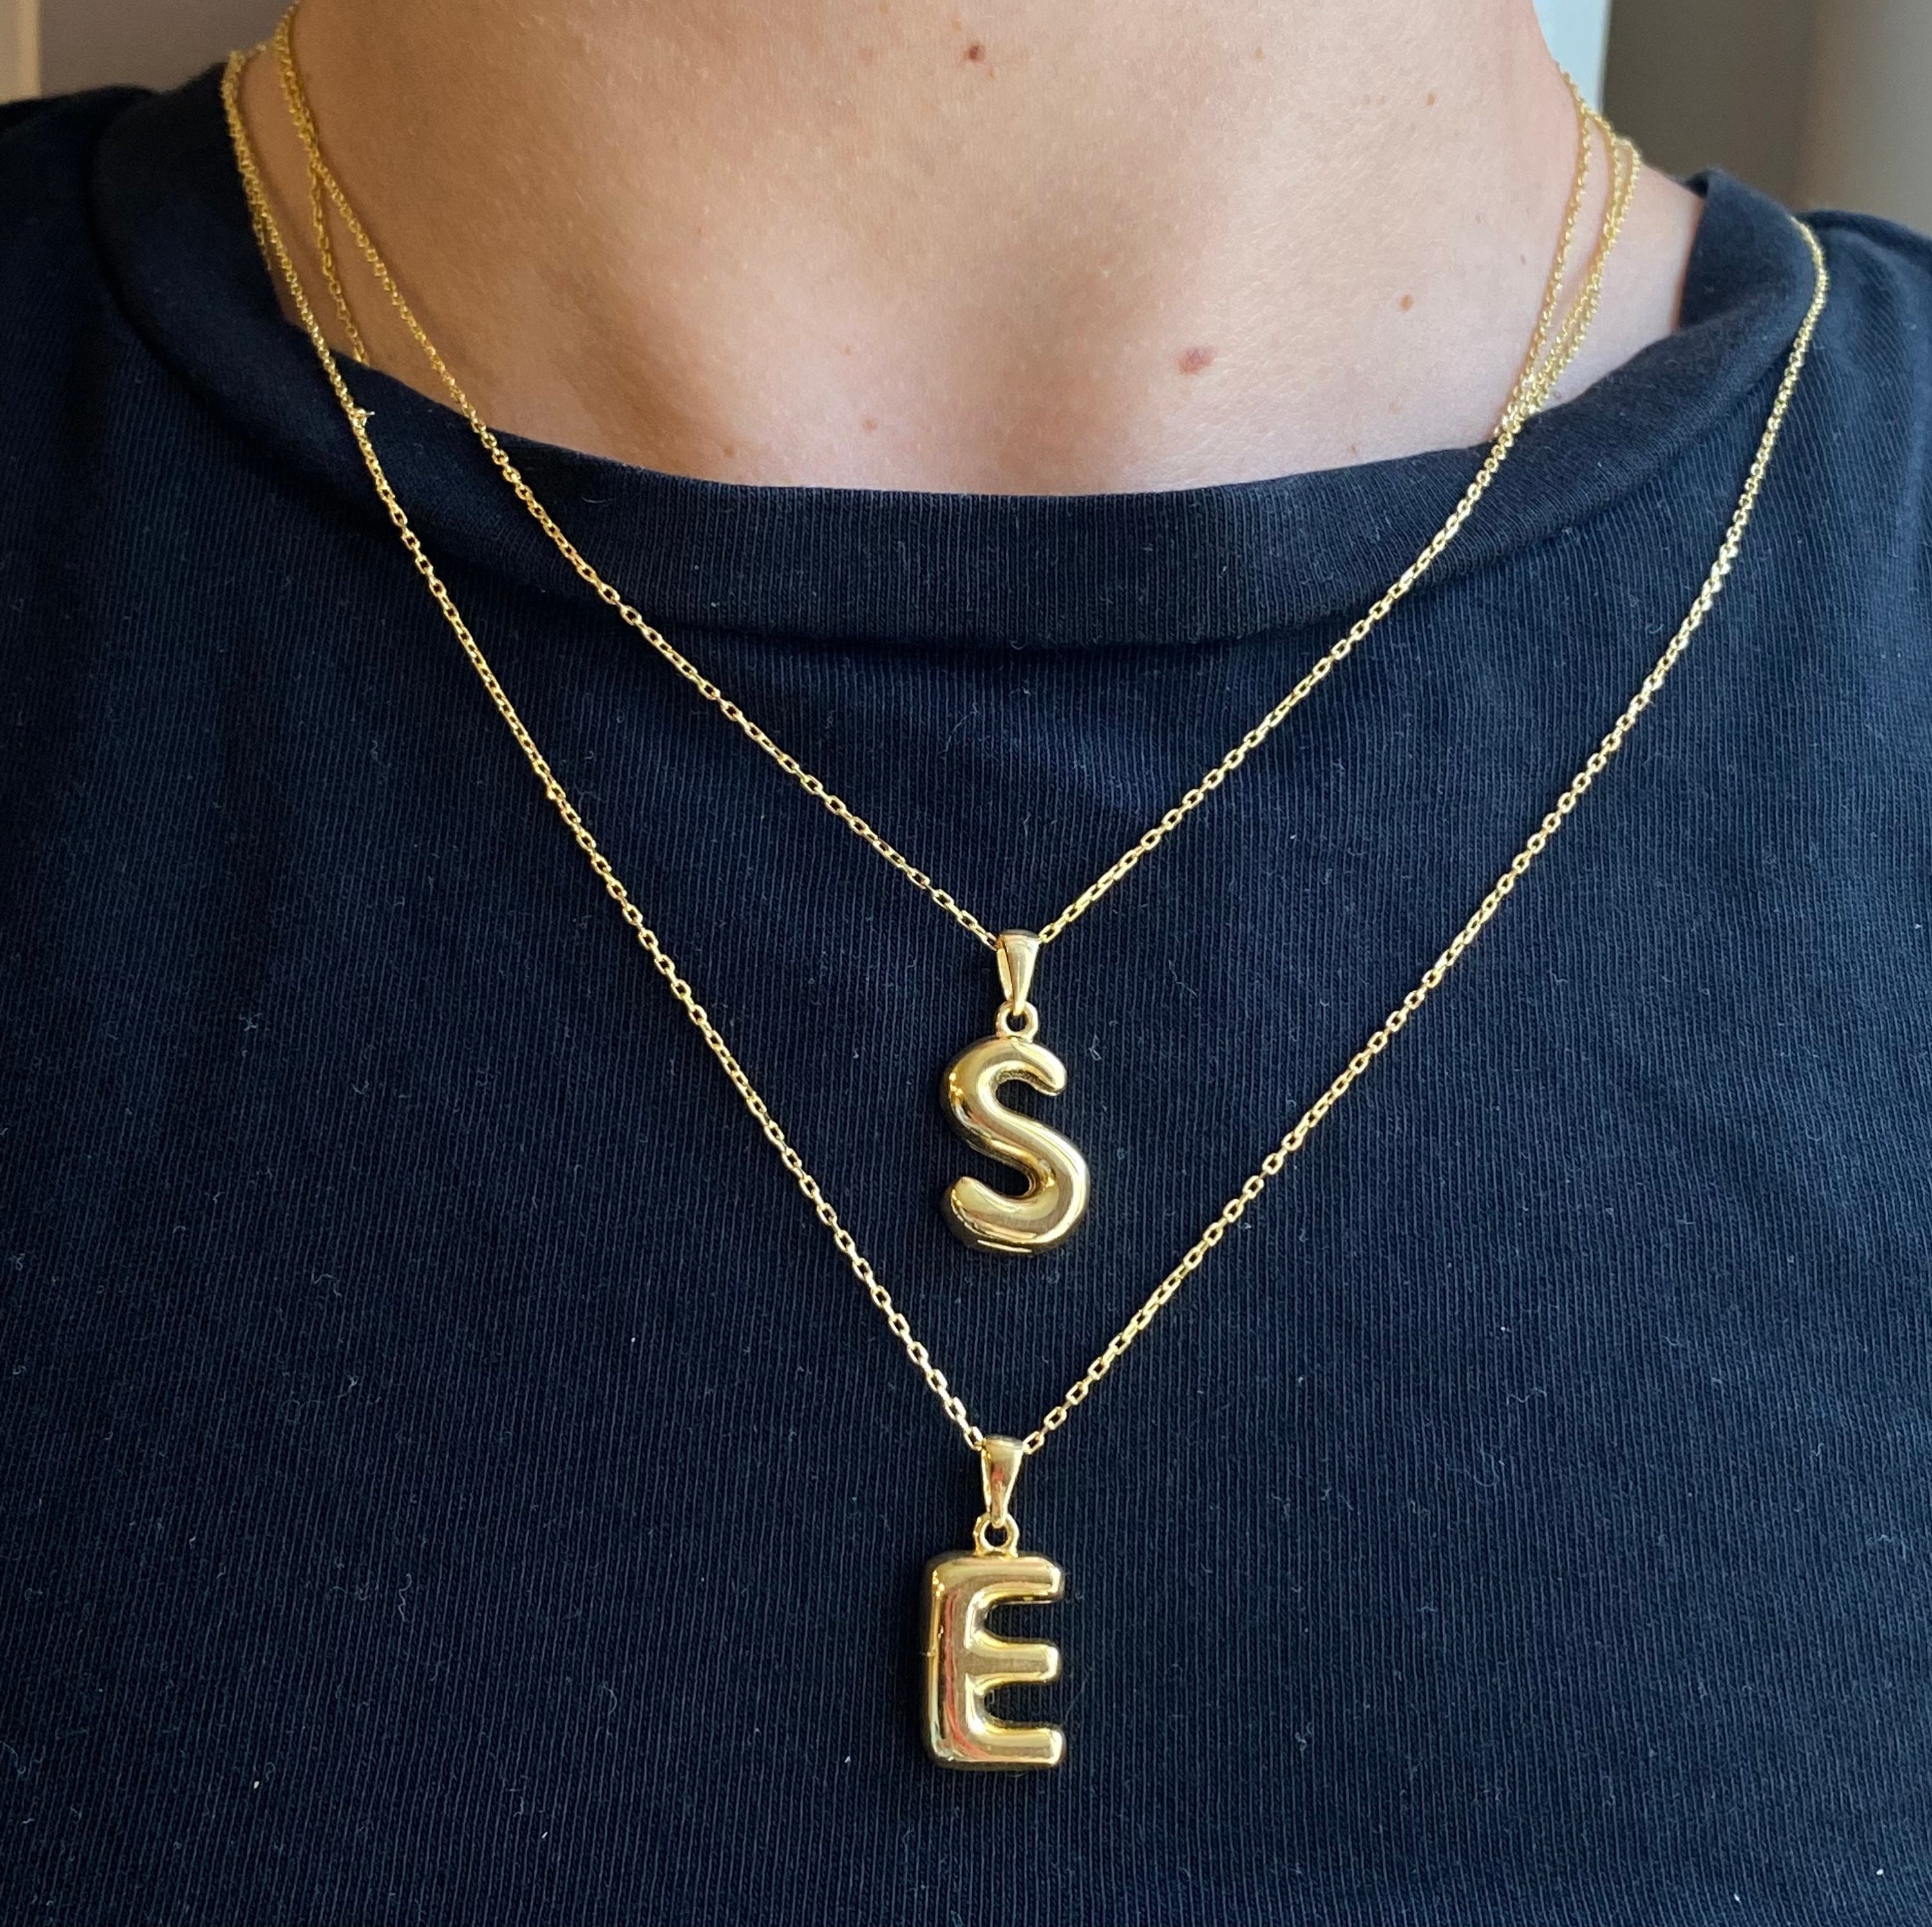 Letter S Necklace in 14k Gold